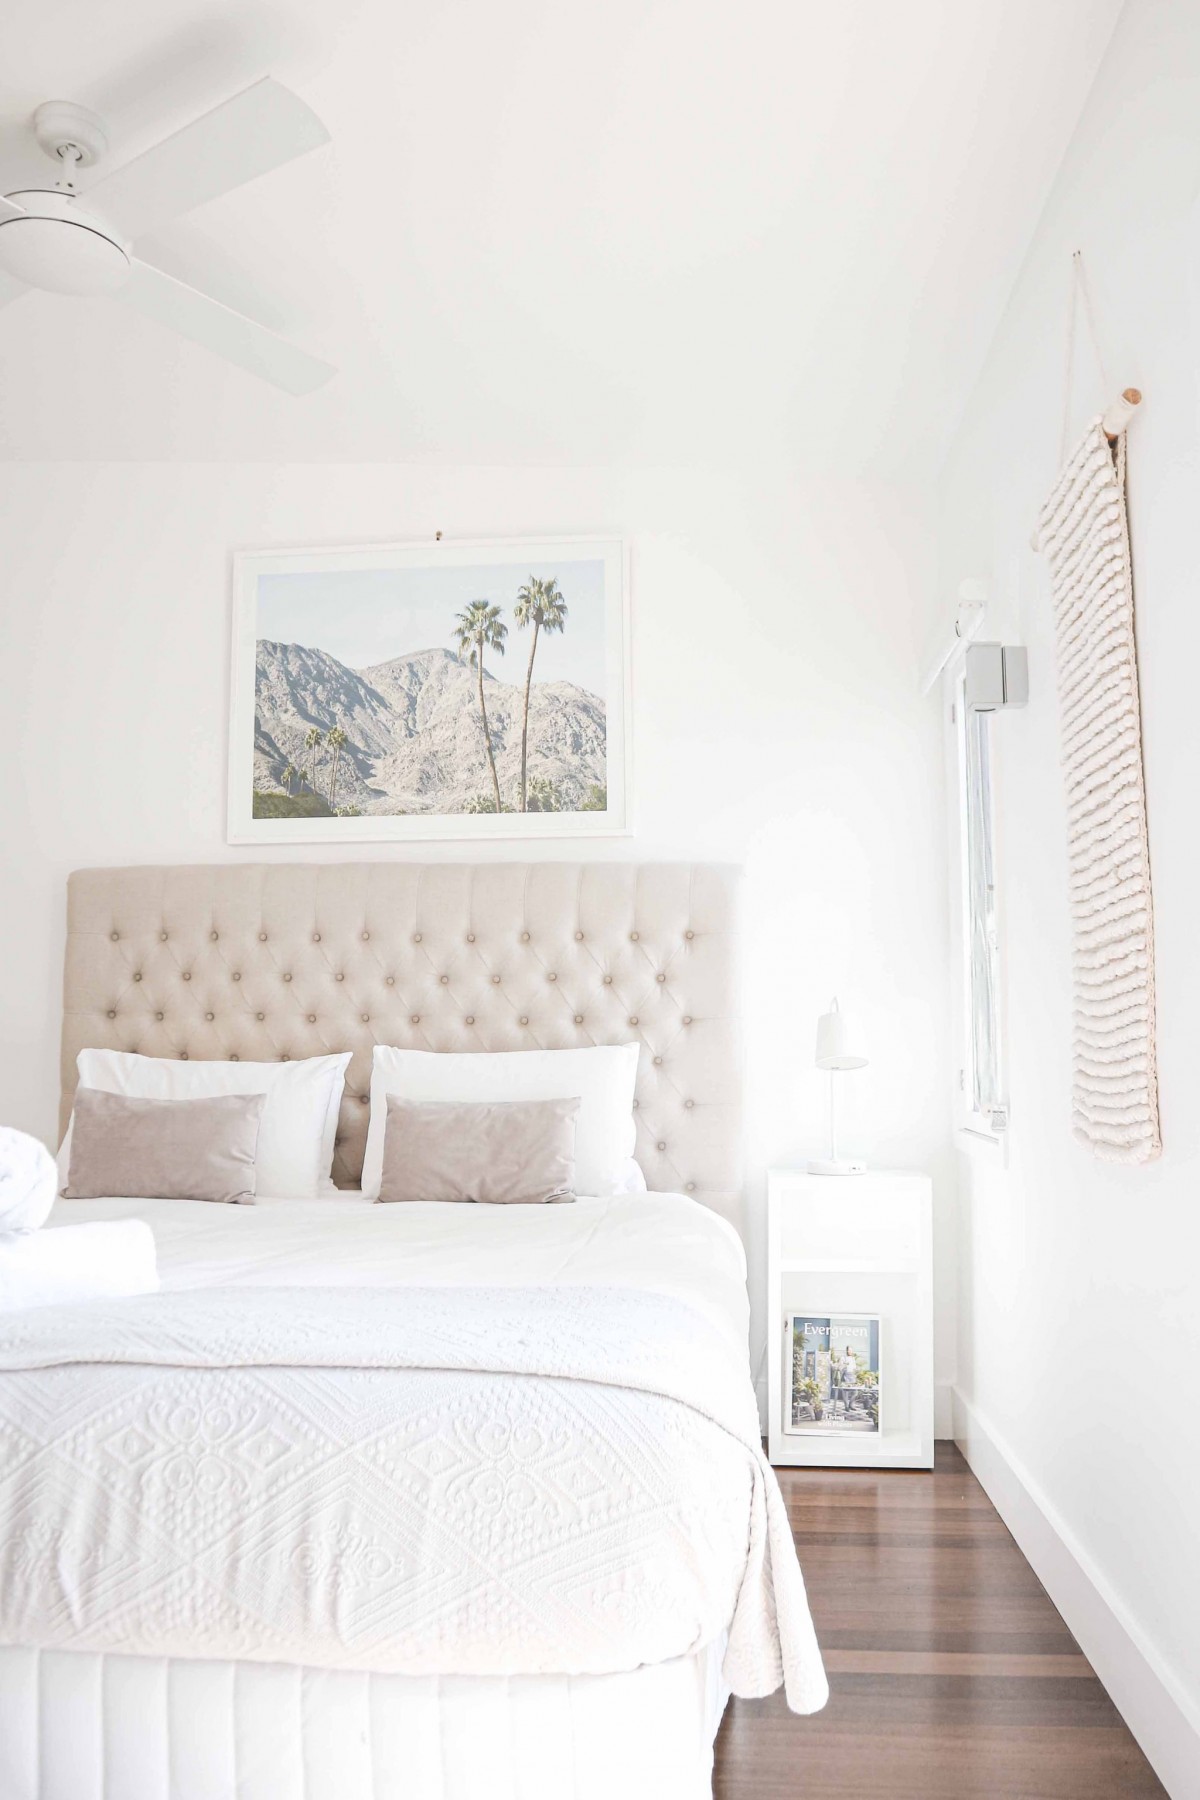 How to Make a Small Bedroom Look Bigger and Brighter